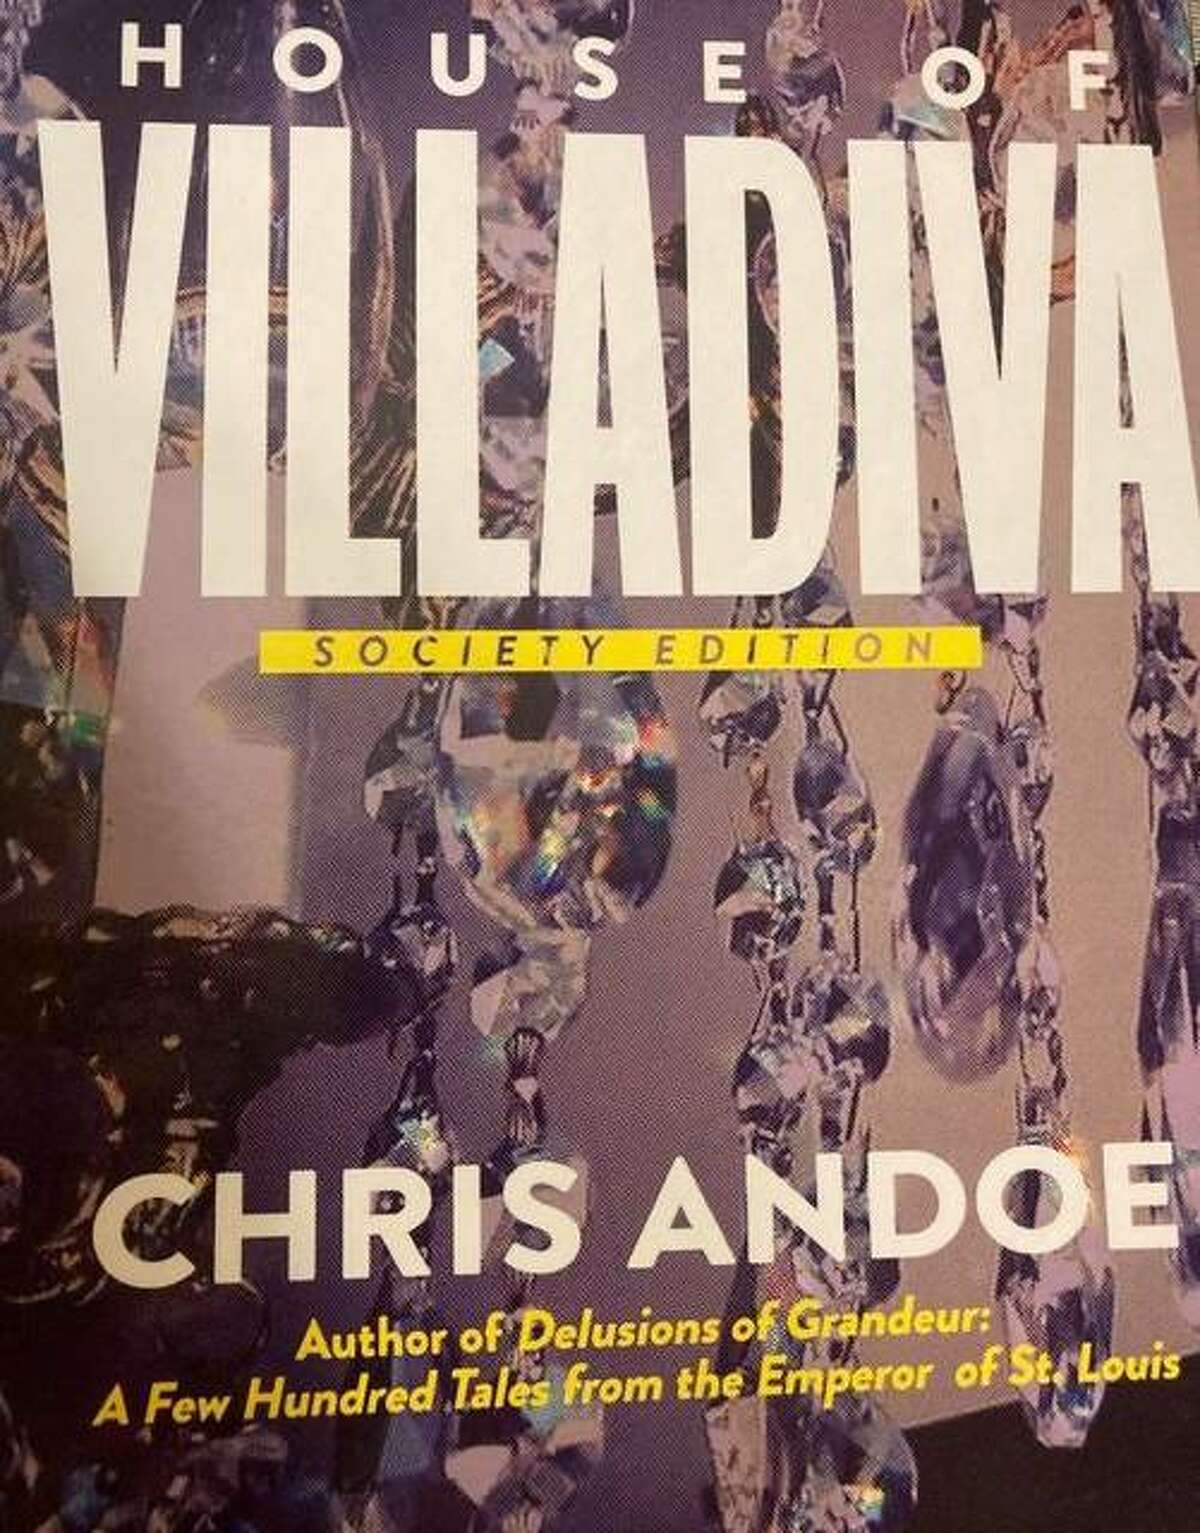 “House of Villadiva: Society Edition,” by Chris Andoe, releases wide in hardback with full-color images, including those of Alton, Thursday, June 3. The Society Edition graces the finest LGBTQ coffee tables from Alton to Los Angeles (“Will & Grace” star Coco Peru is photographed with hers). The black-and-white edition of “Villadiva” releases Thursday, June 10, along with the e-book for $7.99, where all books and e-books are sold.